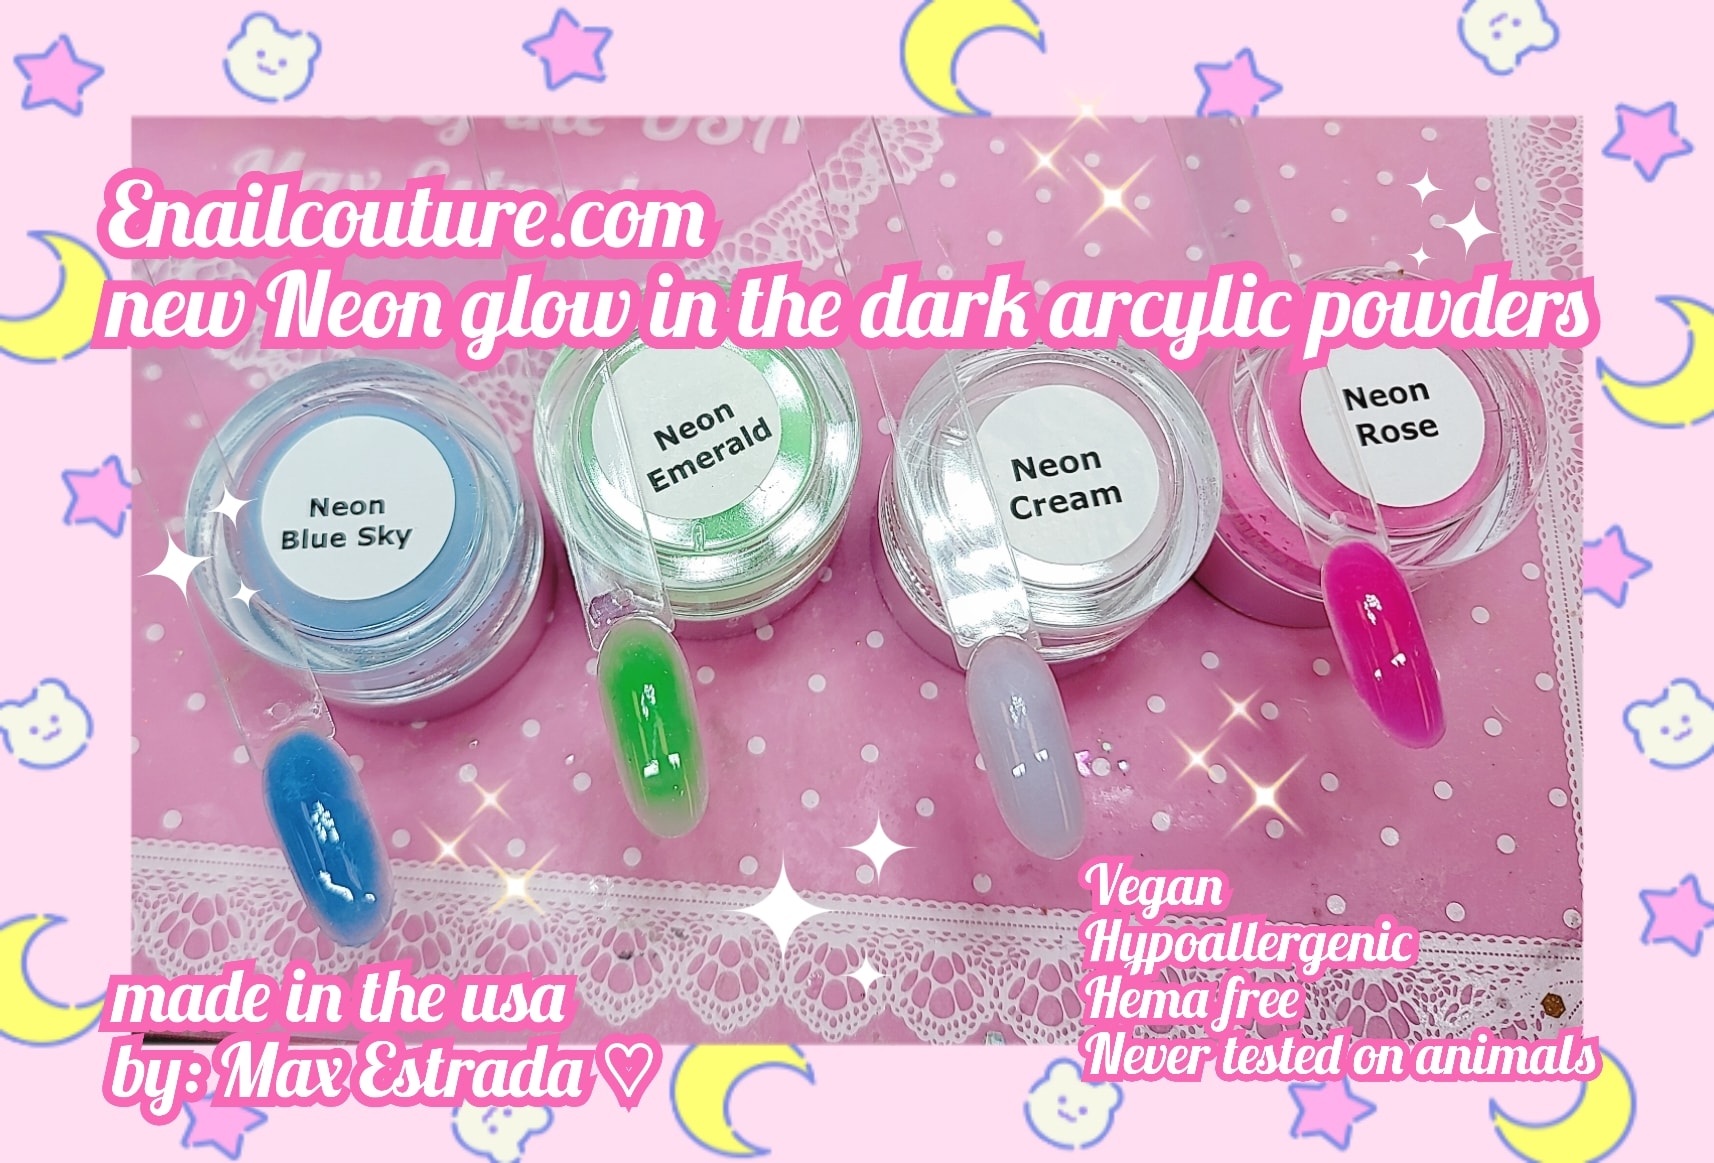 Acrylic Nail Powders ~ Glow in the Dark Collection